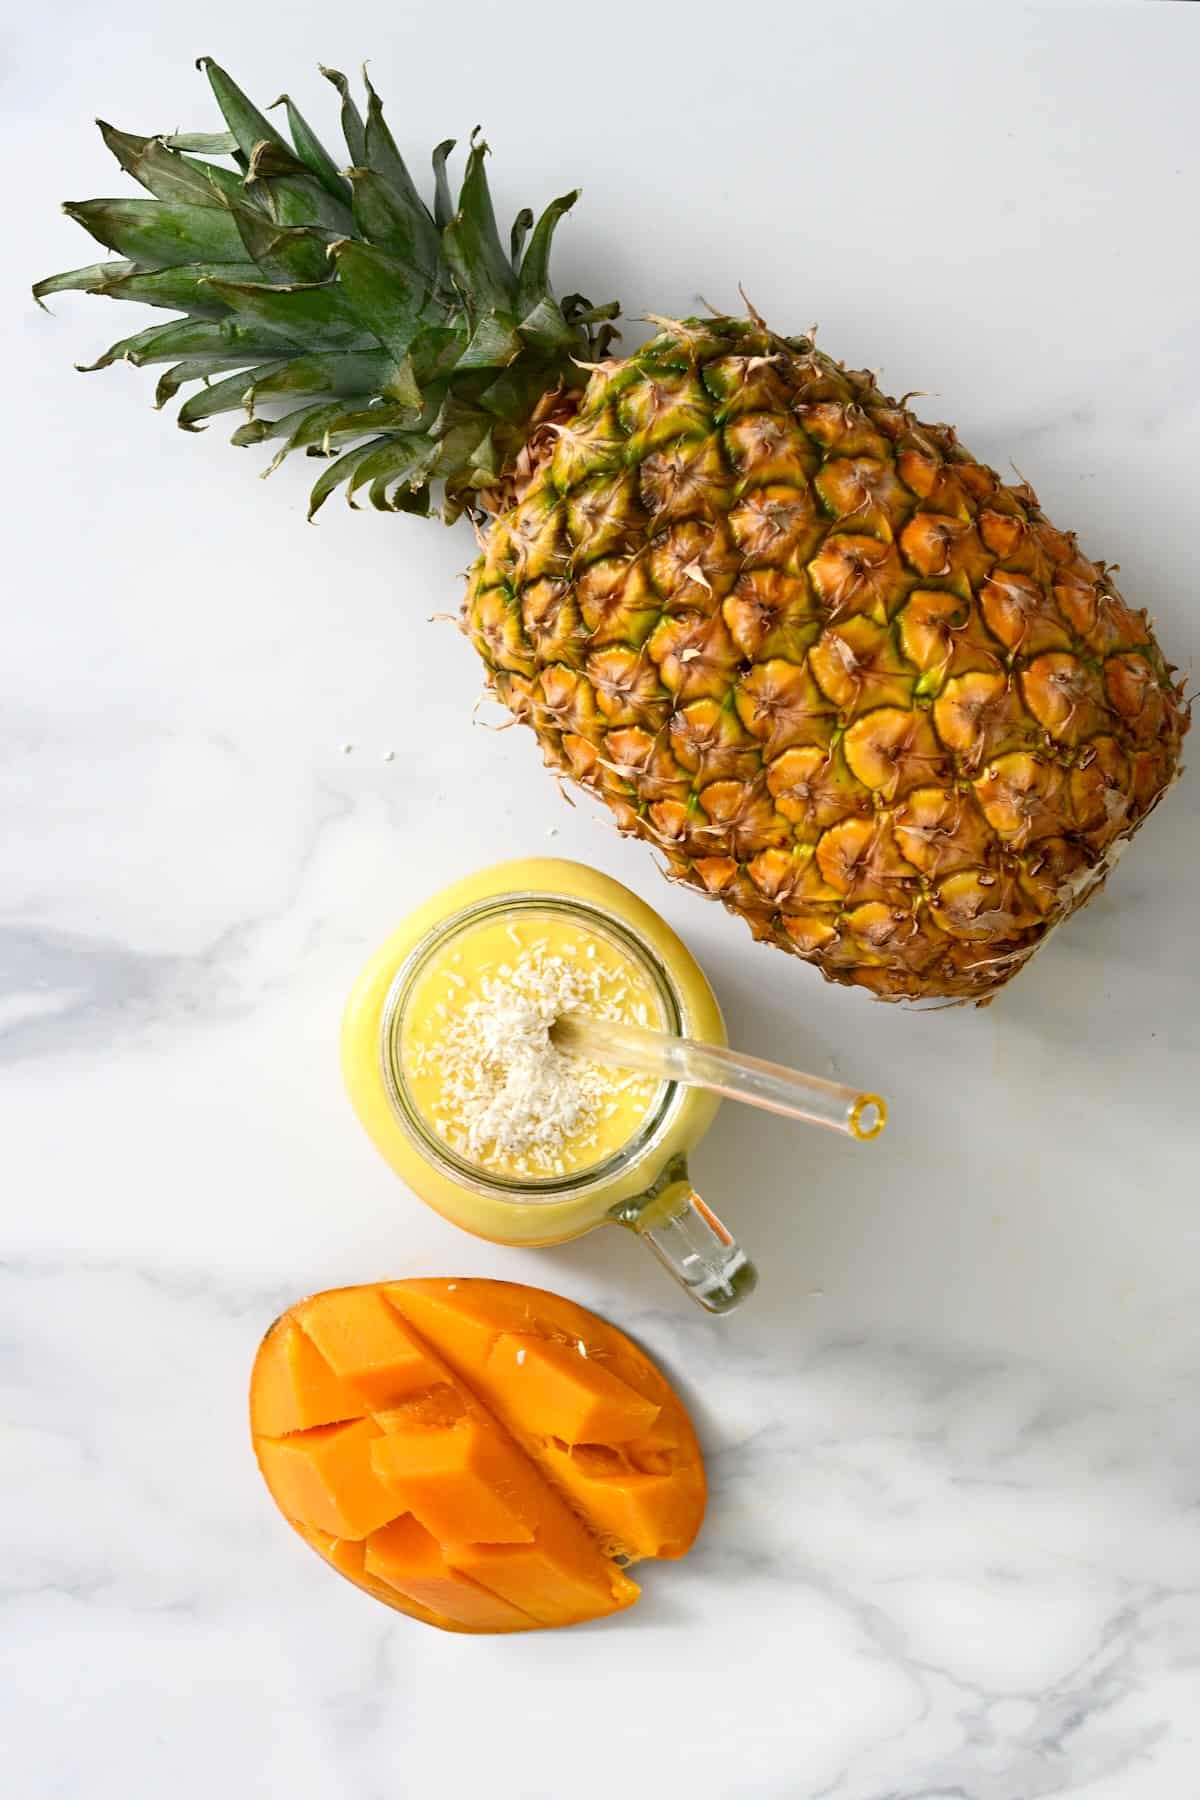 A pineapple, yellow smoothie, and half a mango